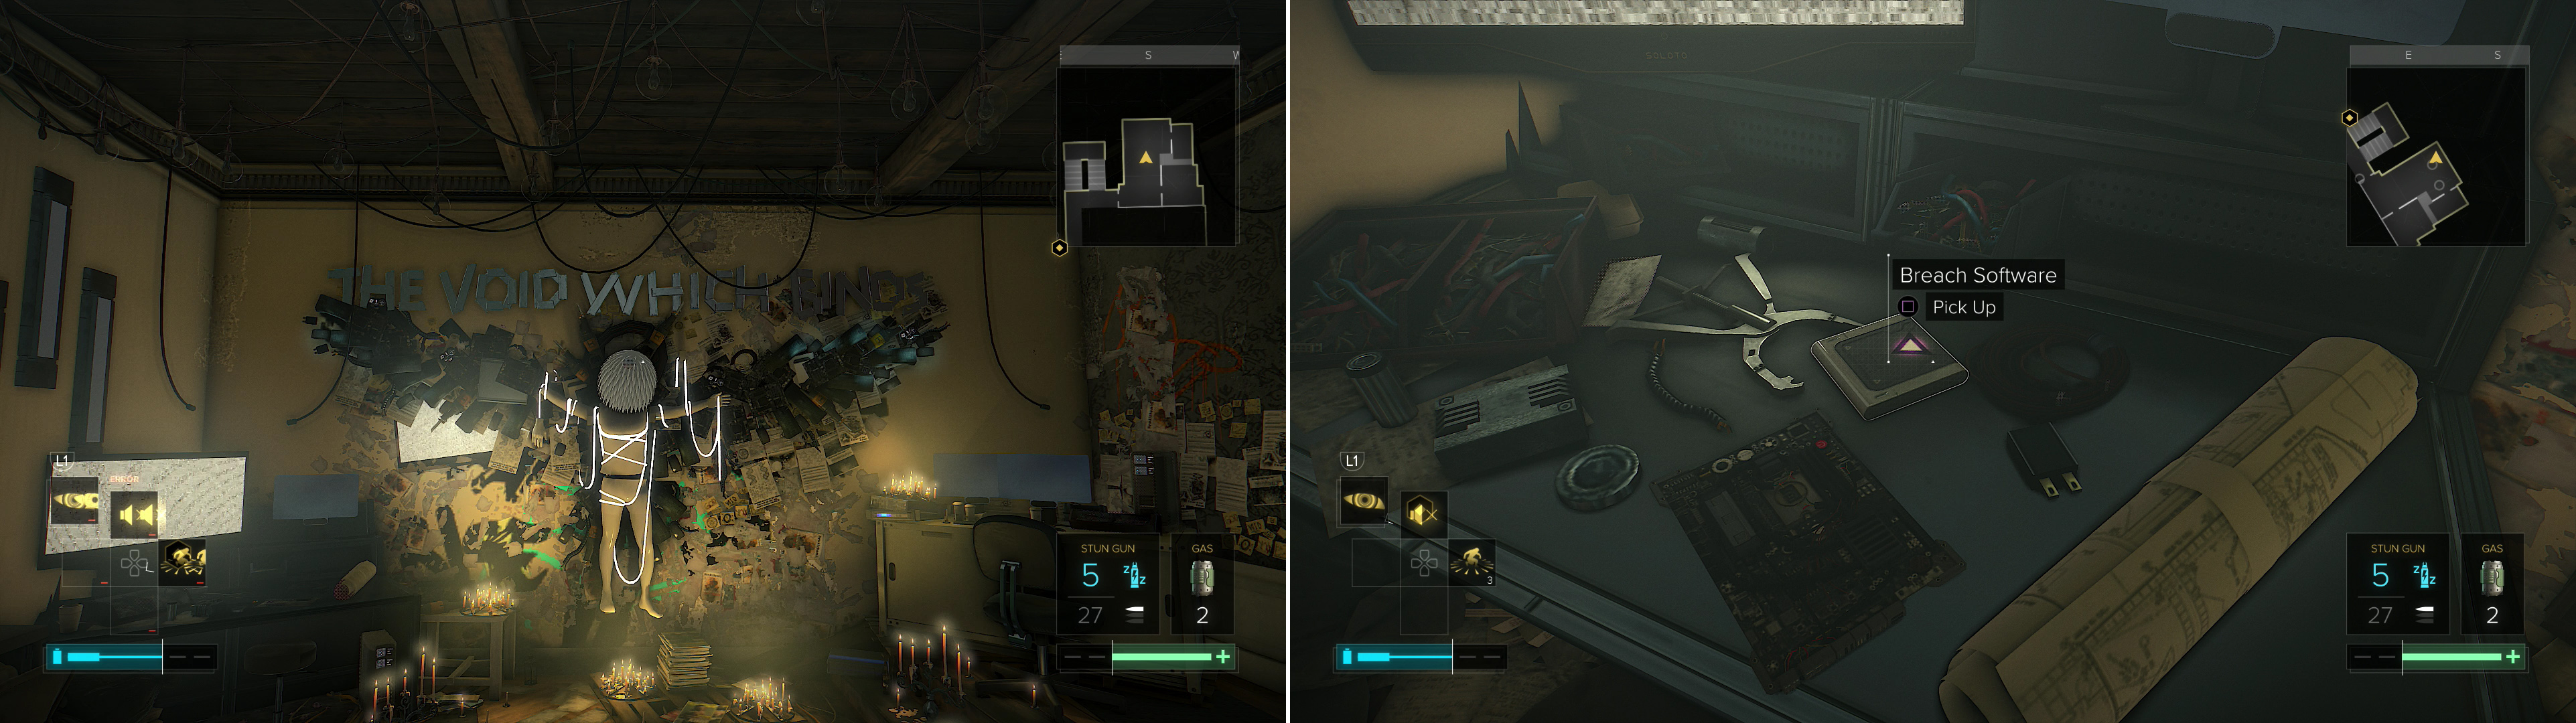 The unsettling wall decoration betray's the password of the man in apartment #14 (left). Be sure to grab Breach Software #29 while you're here (right).